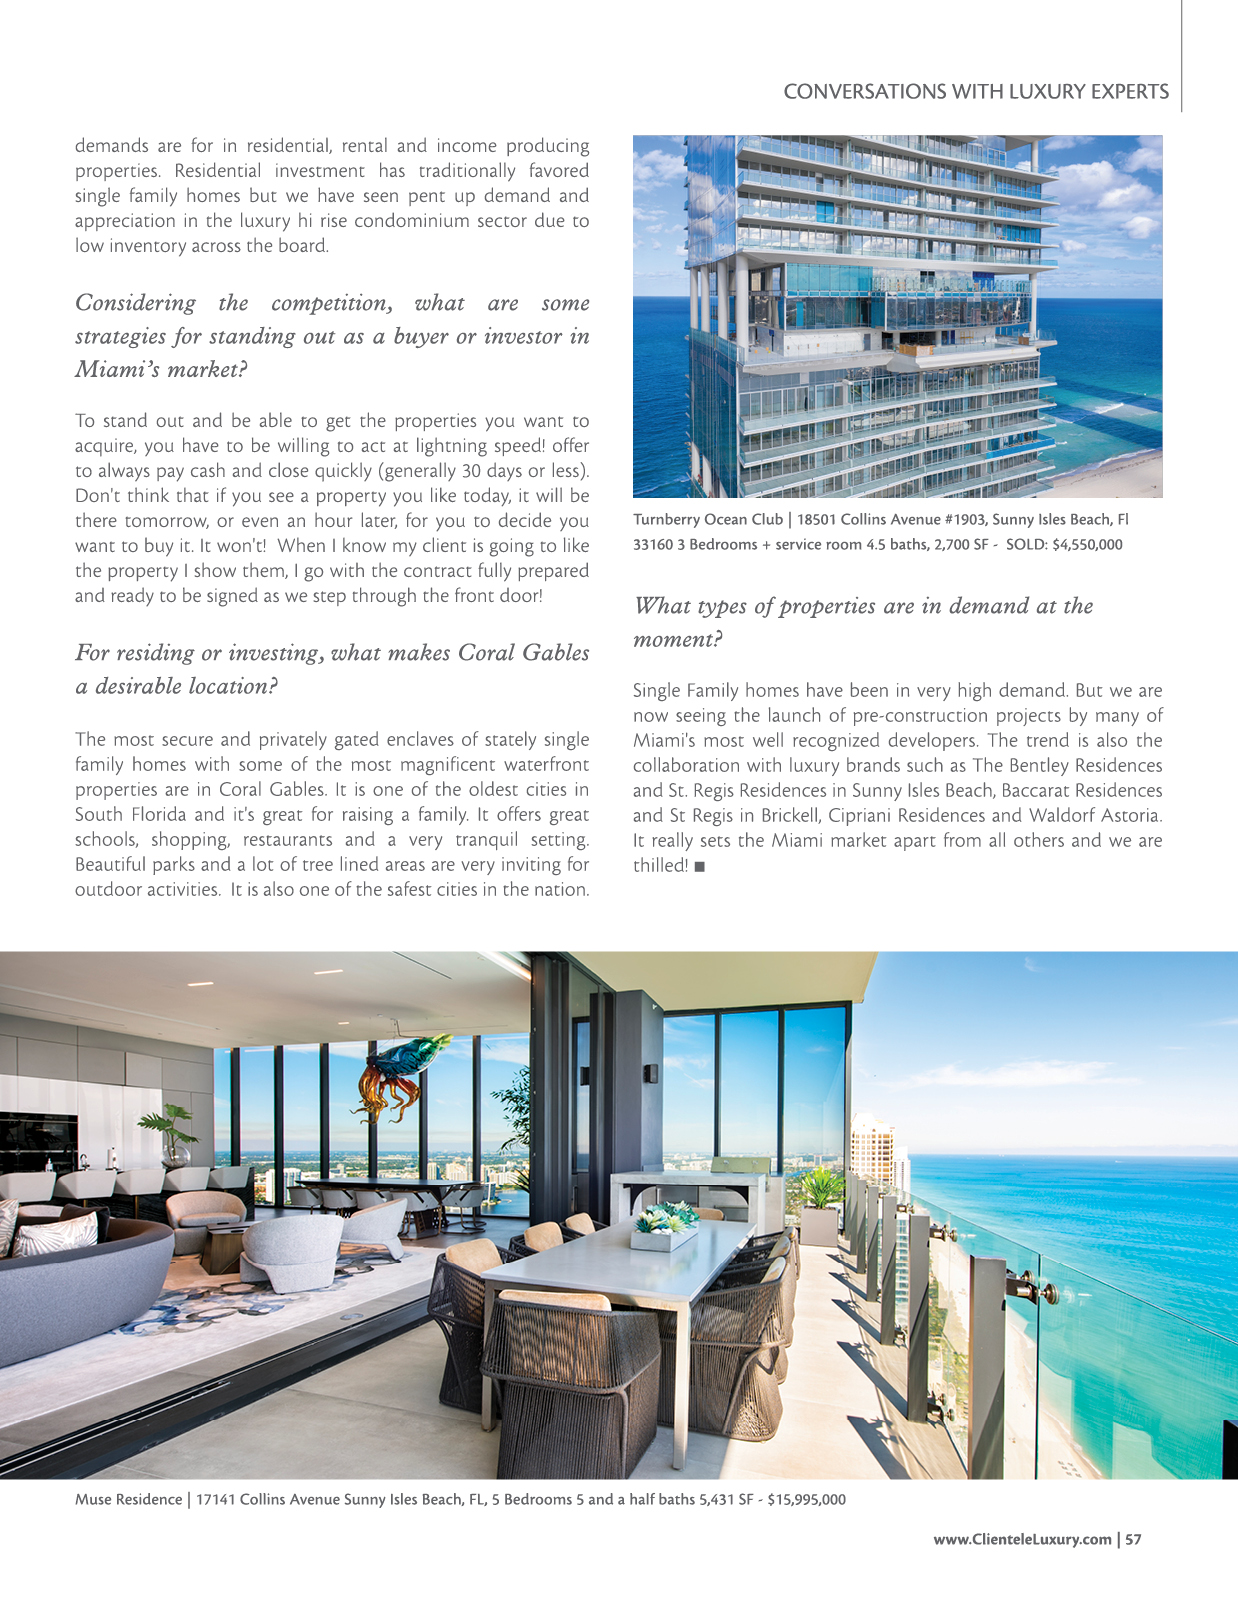 Article Conversations with Luxury Experts 2022 Summer Issue Clientele Luxury